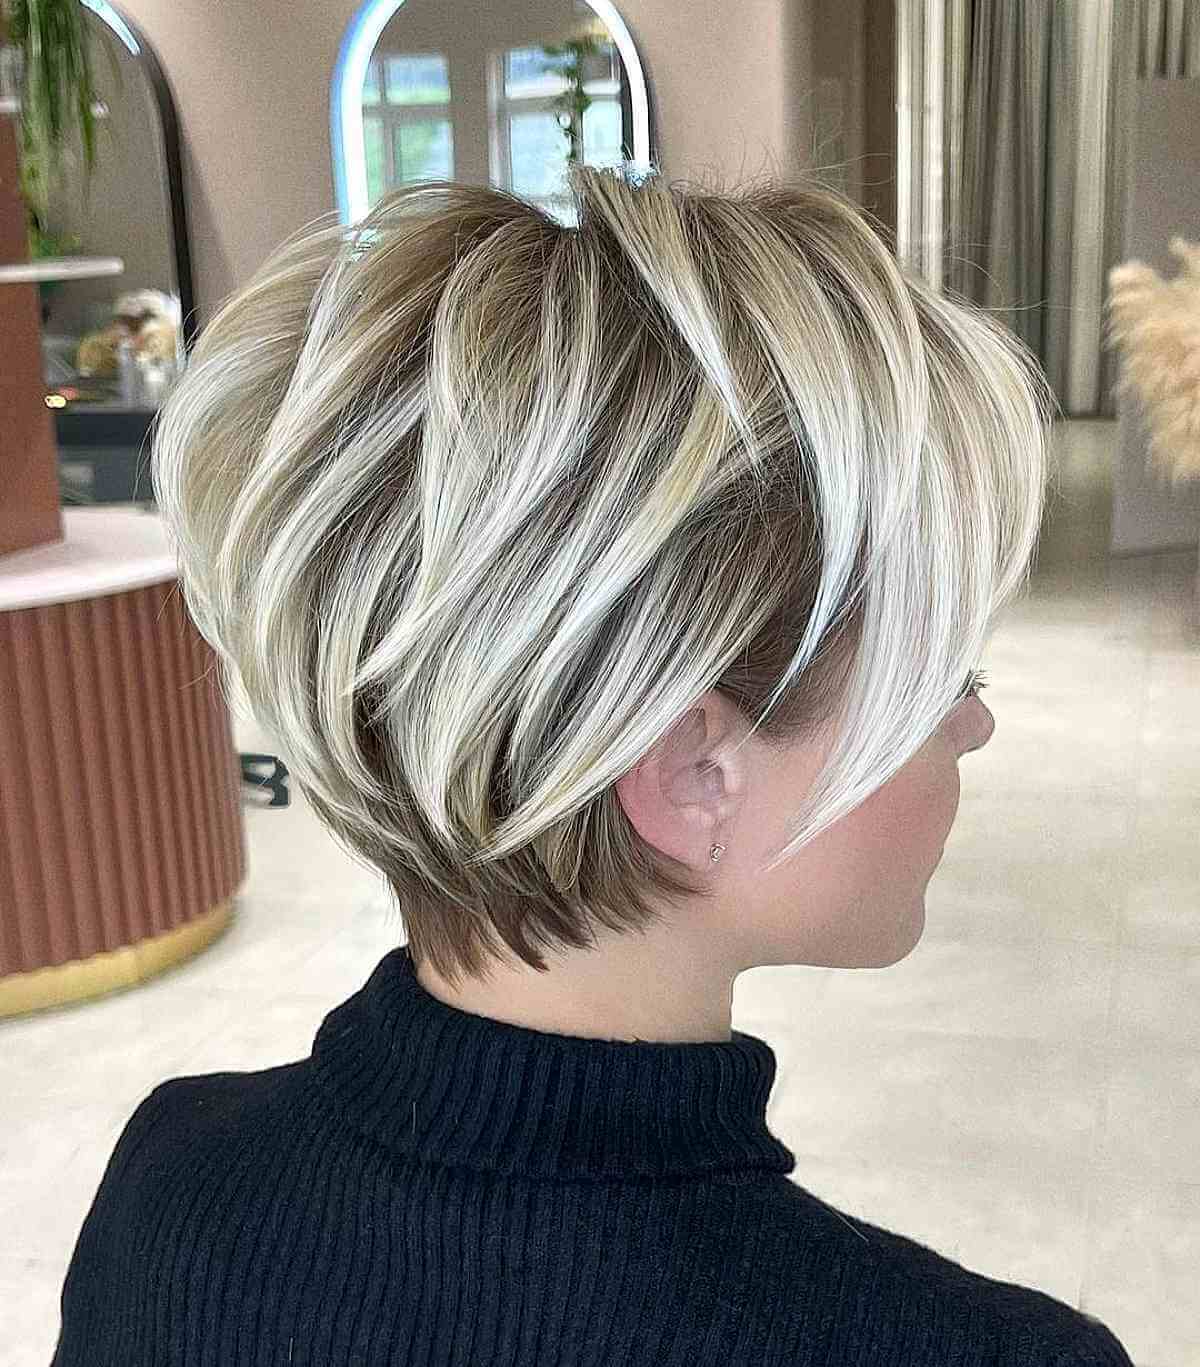 Short Champagne Blonde Balayage on a Long Pixie